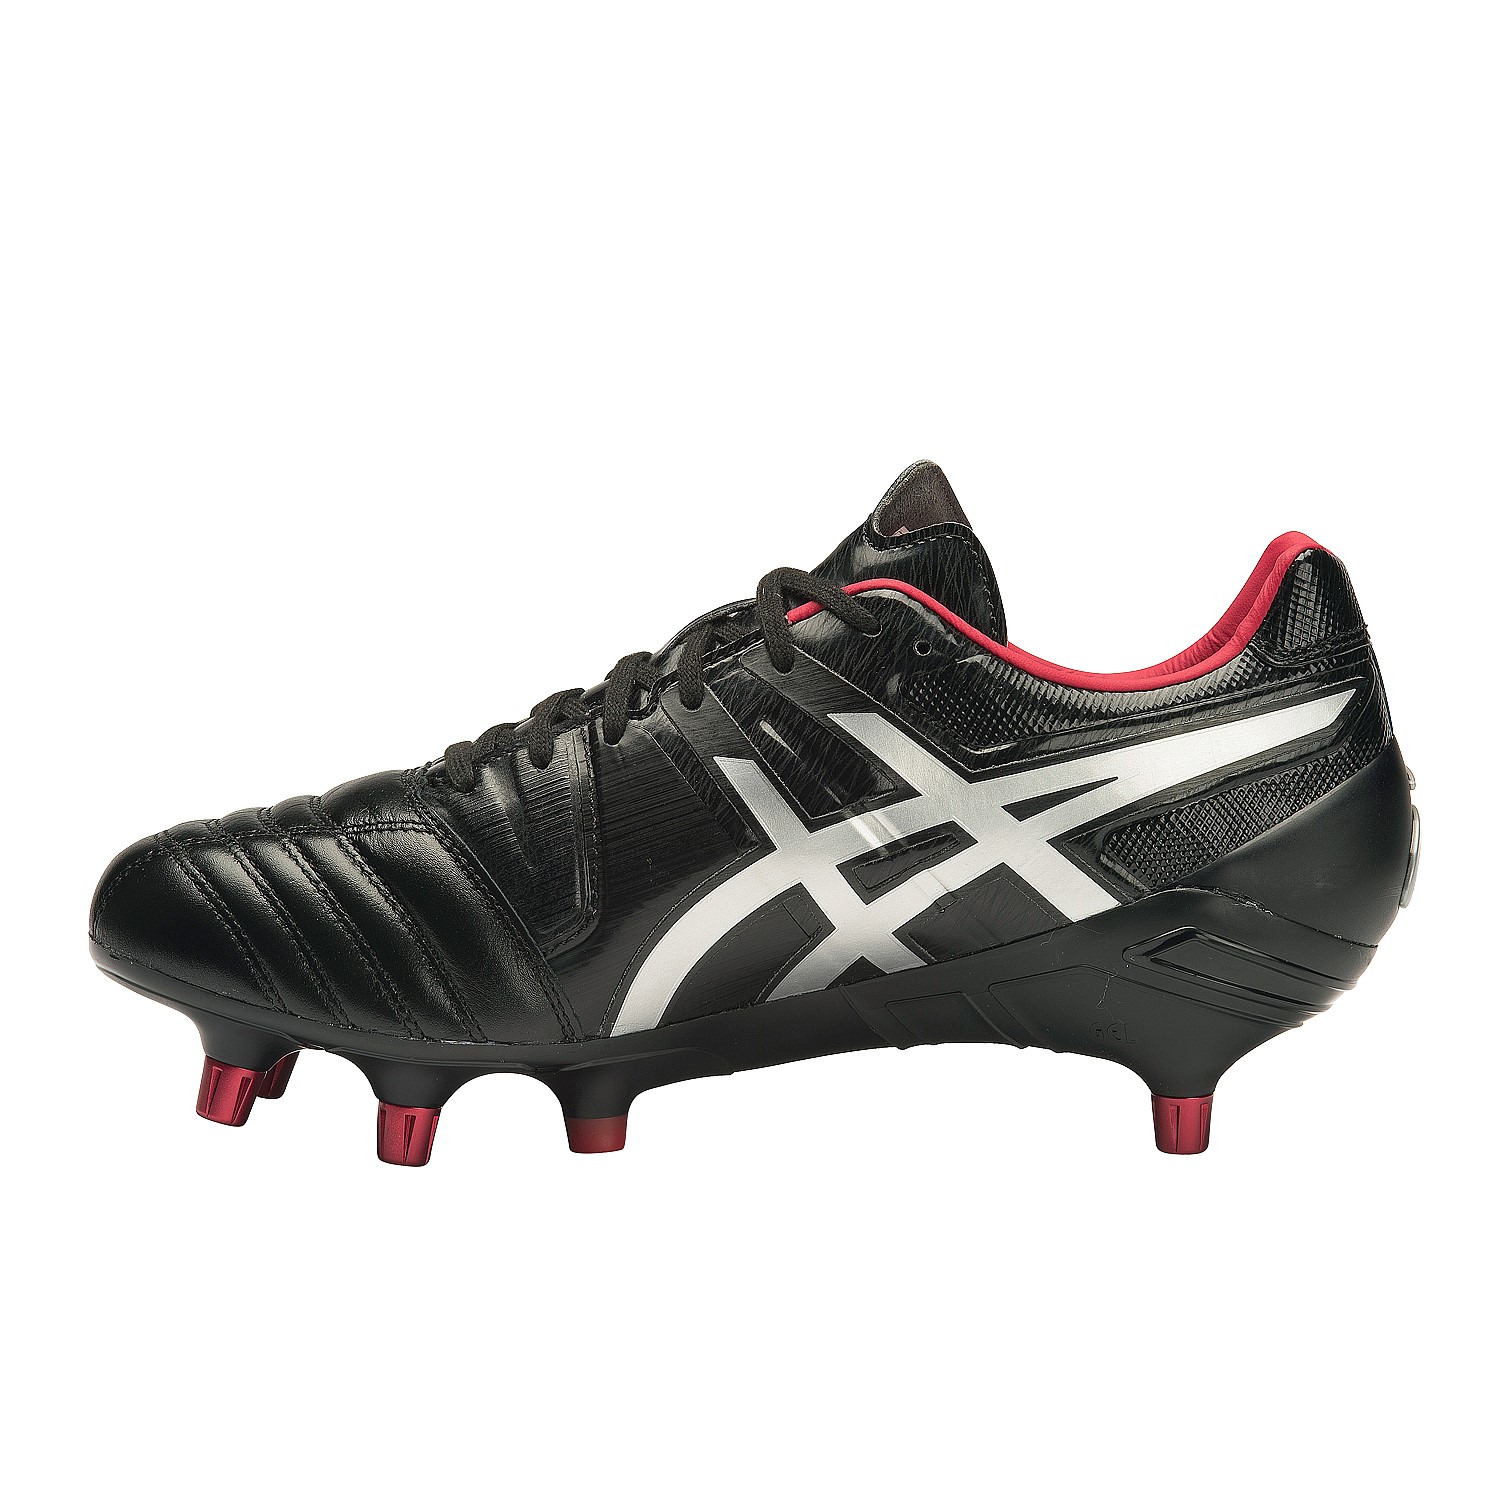 asics tight five rugby boots